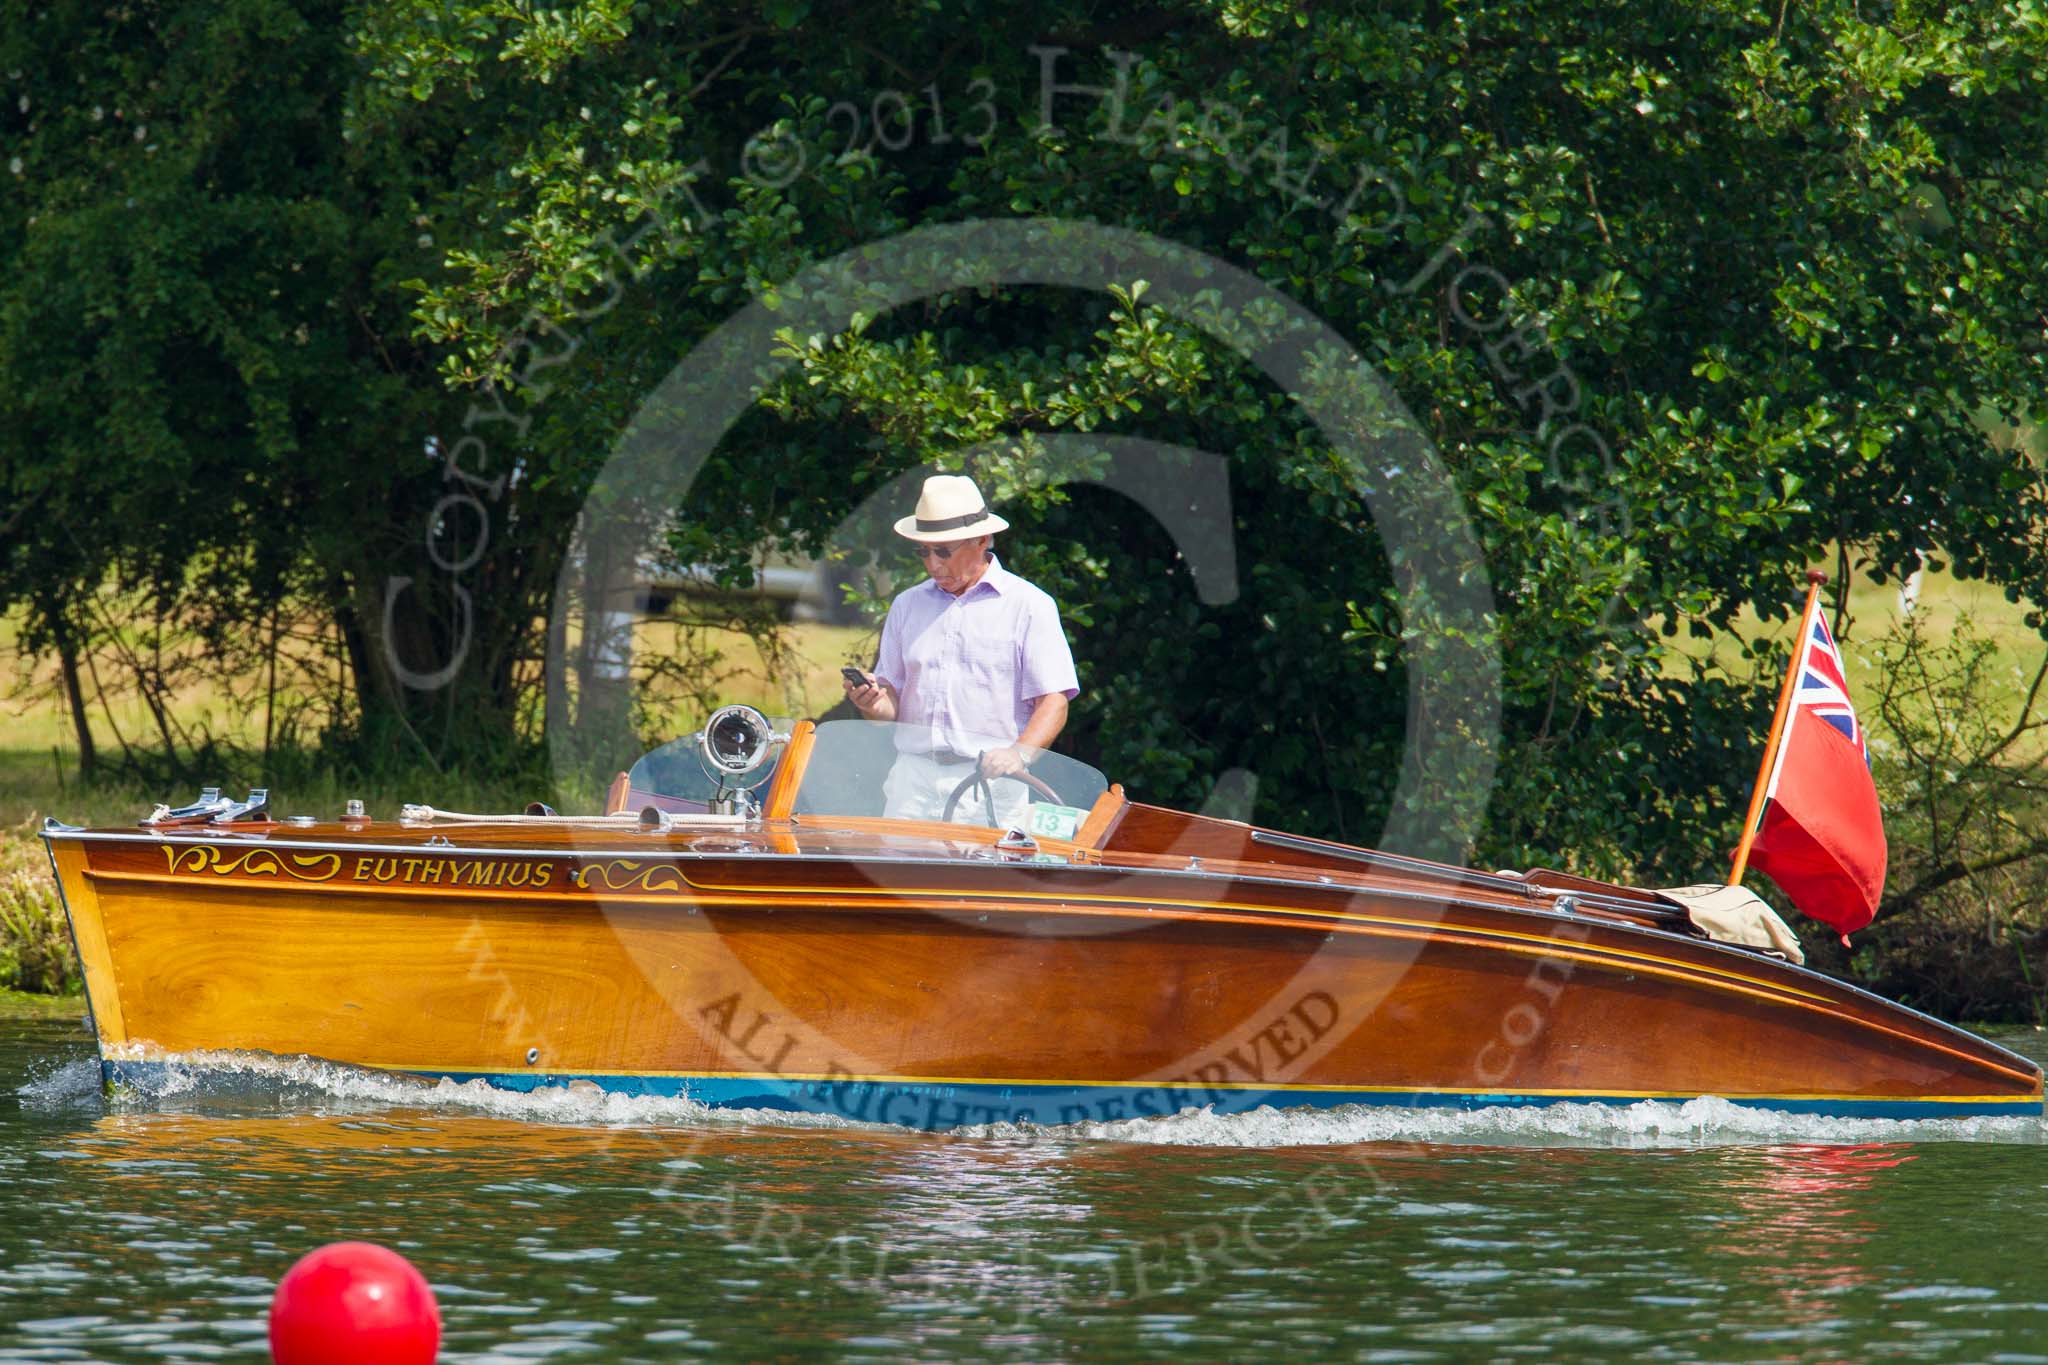 Henley Royal Regatta 2013, Saturday: Pleasure boat traffic next the the HRR race course - "Euthymius". Image #151, 06 July 2013 10:46 River Thames, Henley on Thames, UK